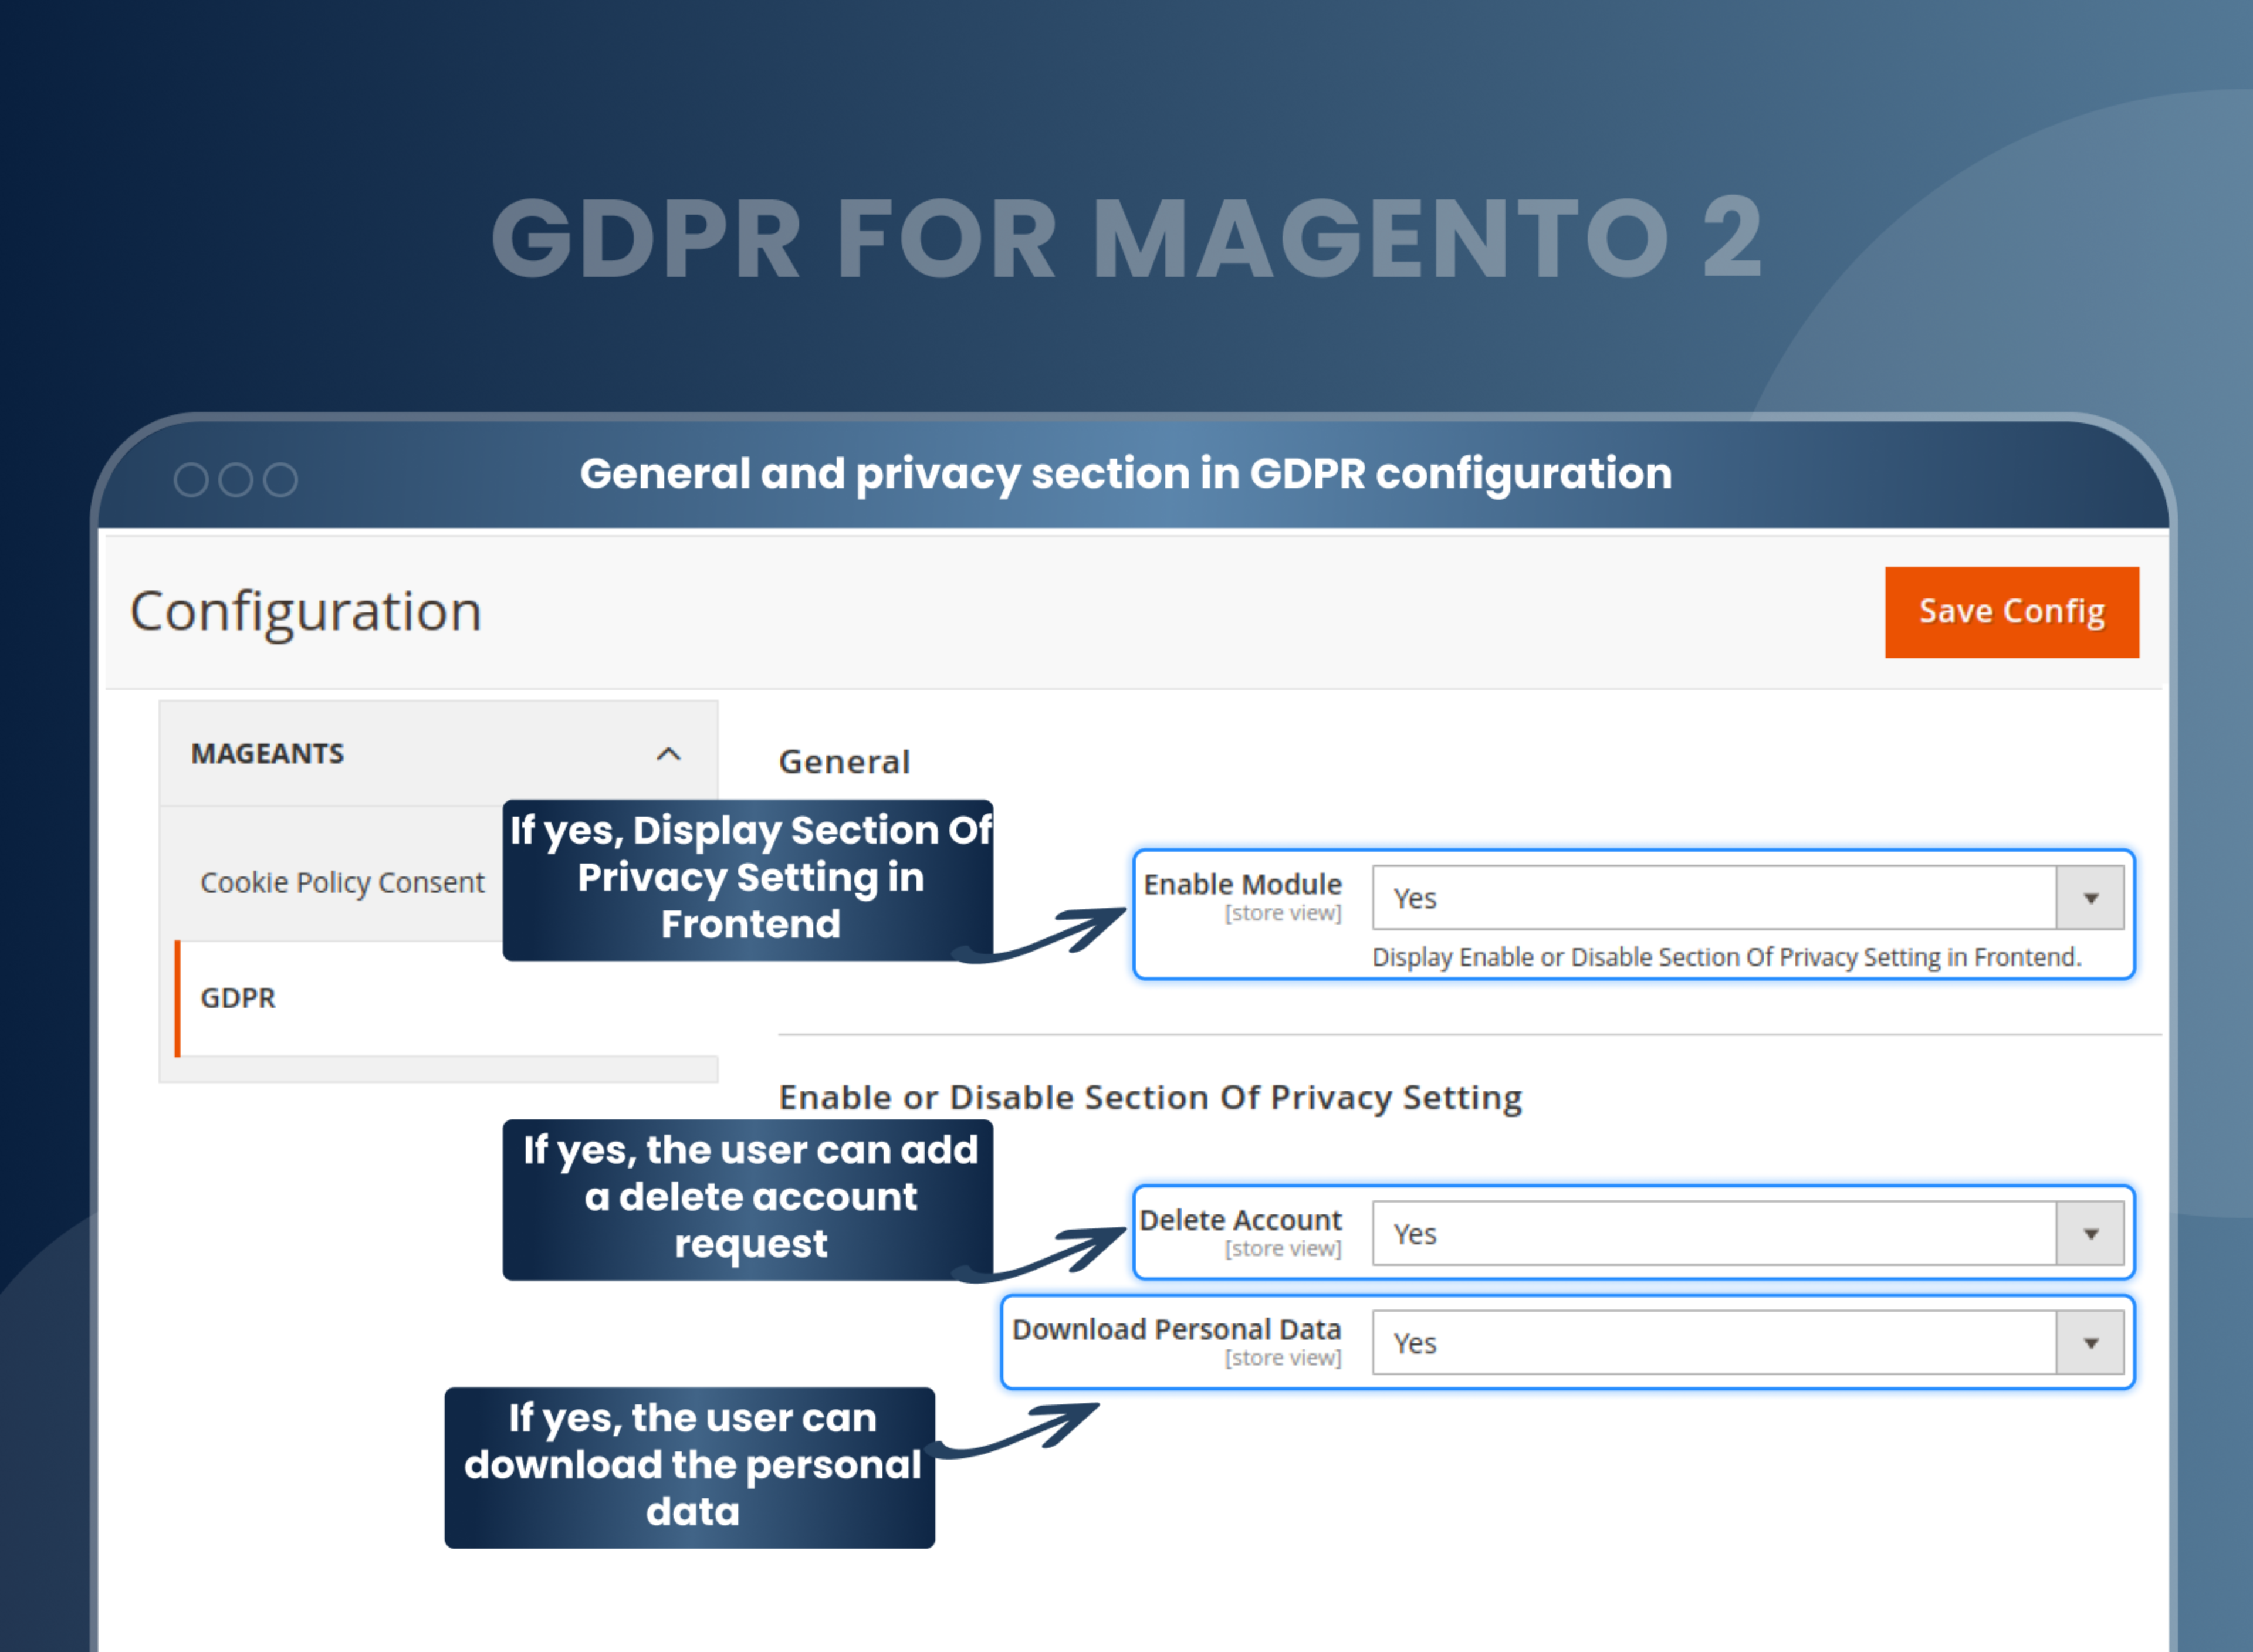 General and privacy section in GDPR configuration